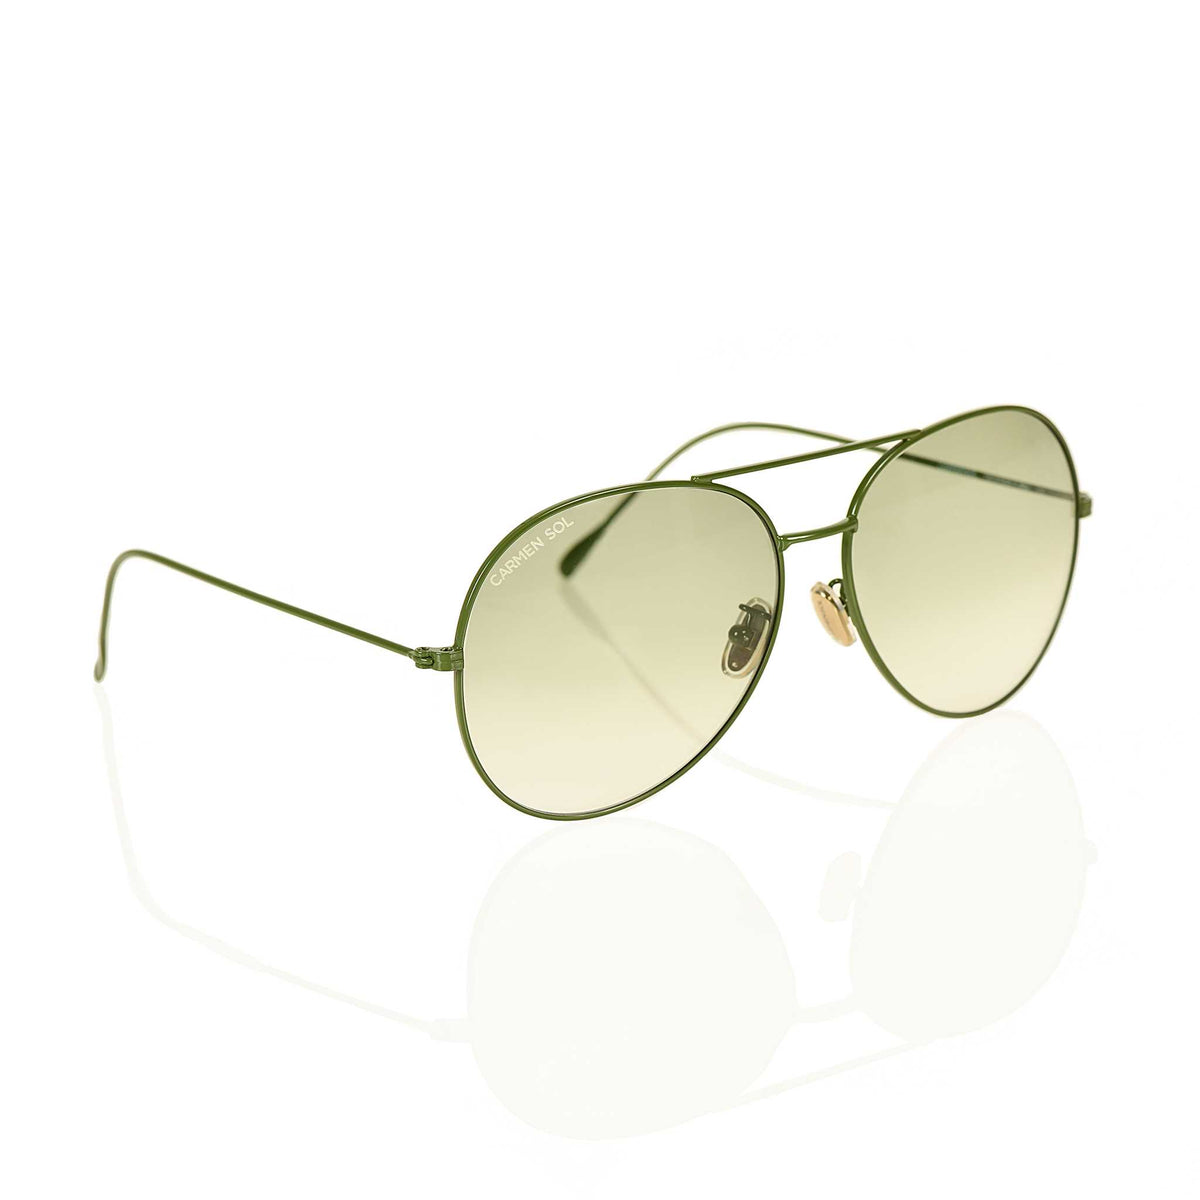 80s sunglasses for women in color olive green perfect also for men